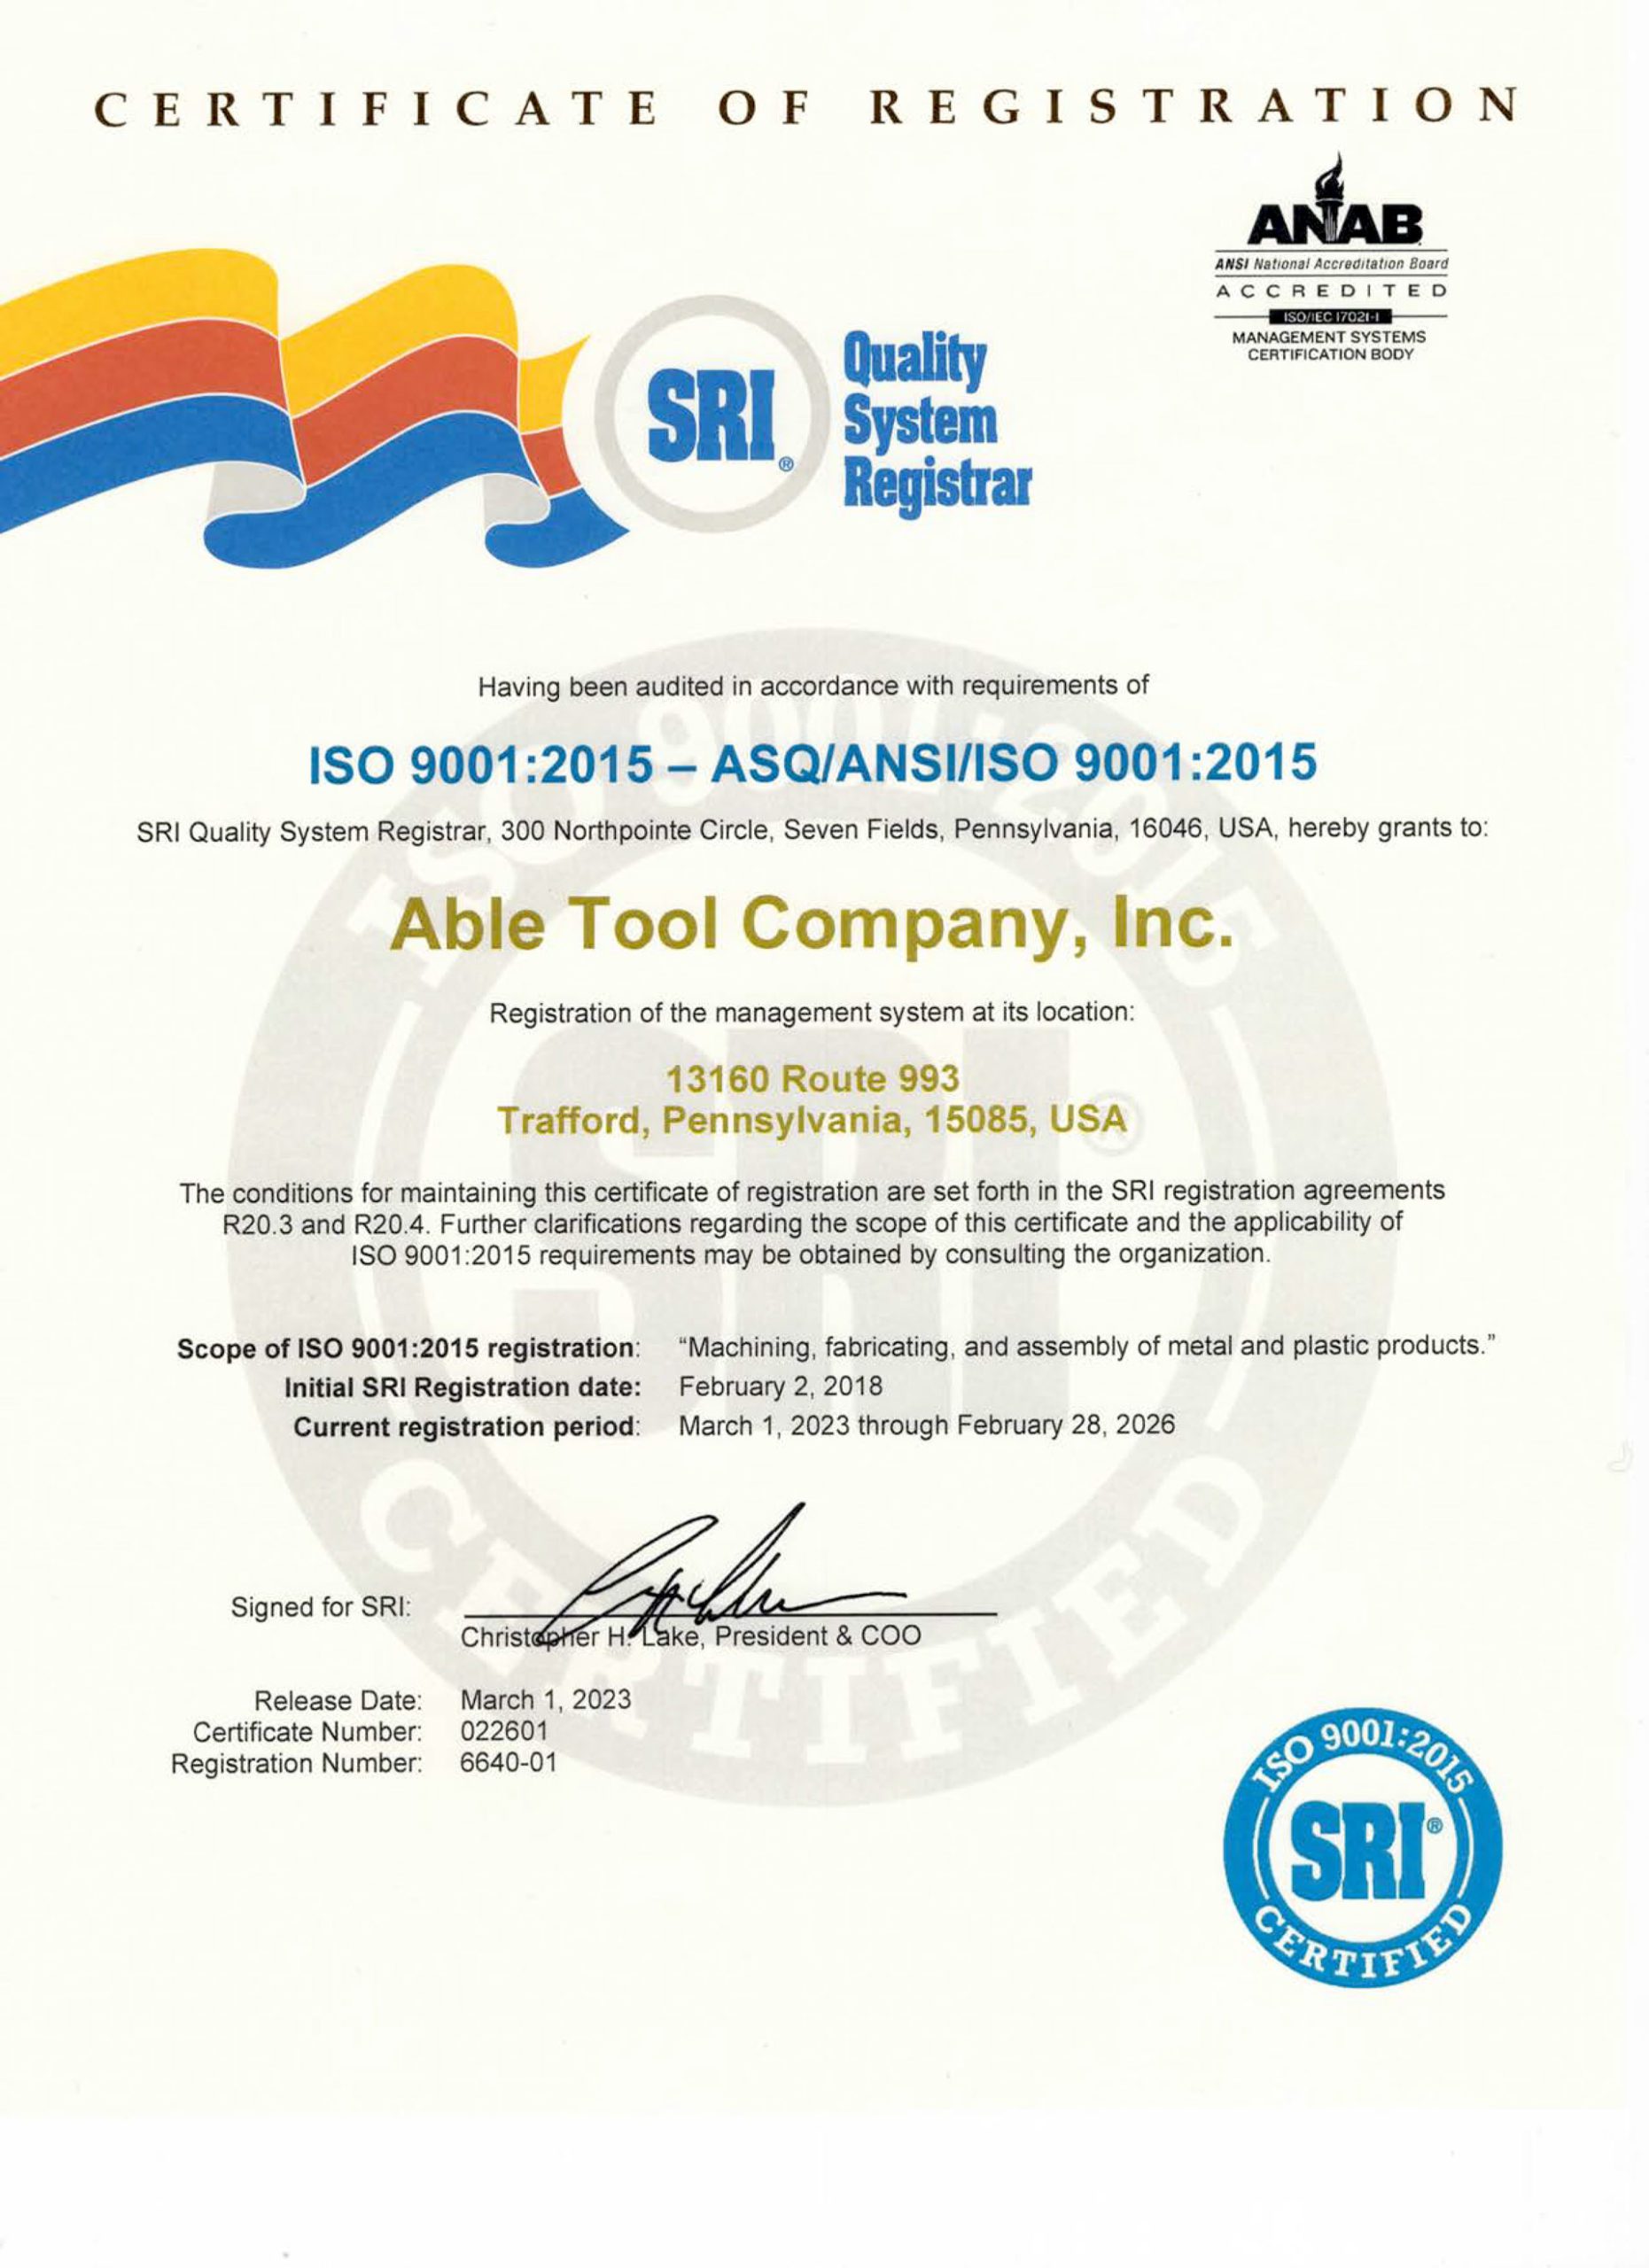 AbleTool Trafford ISO 2023 certificate